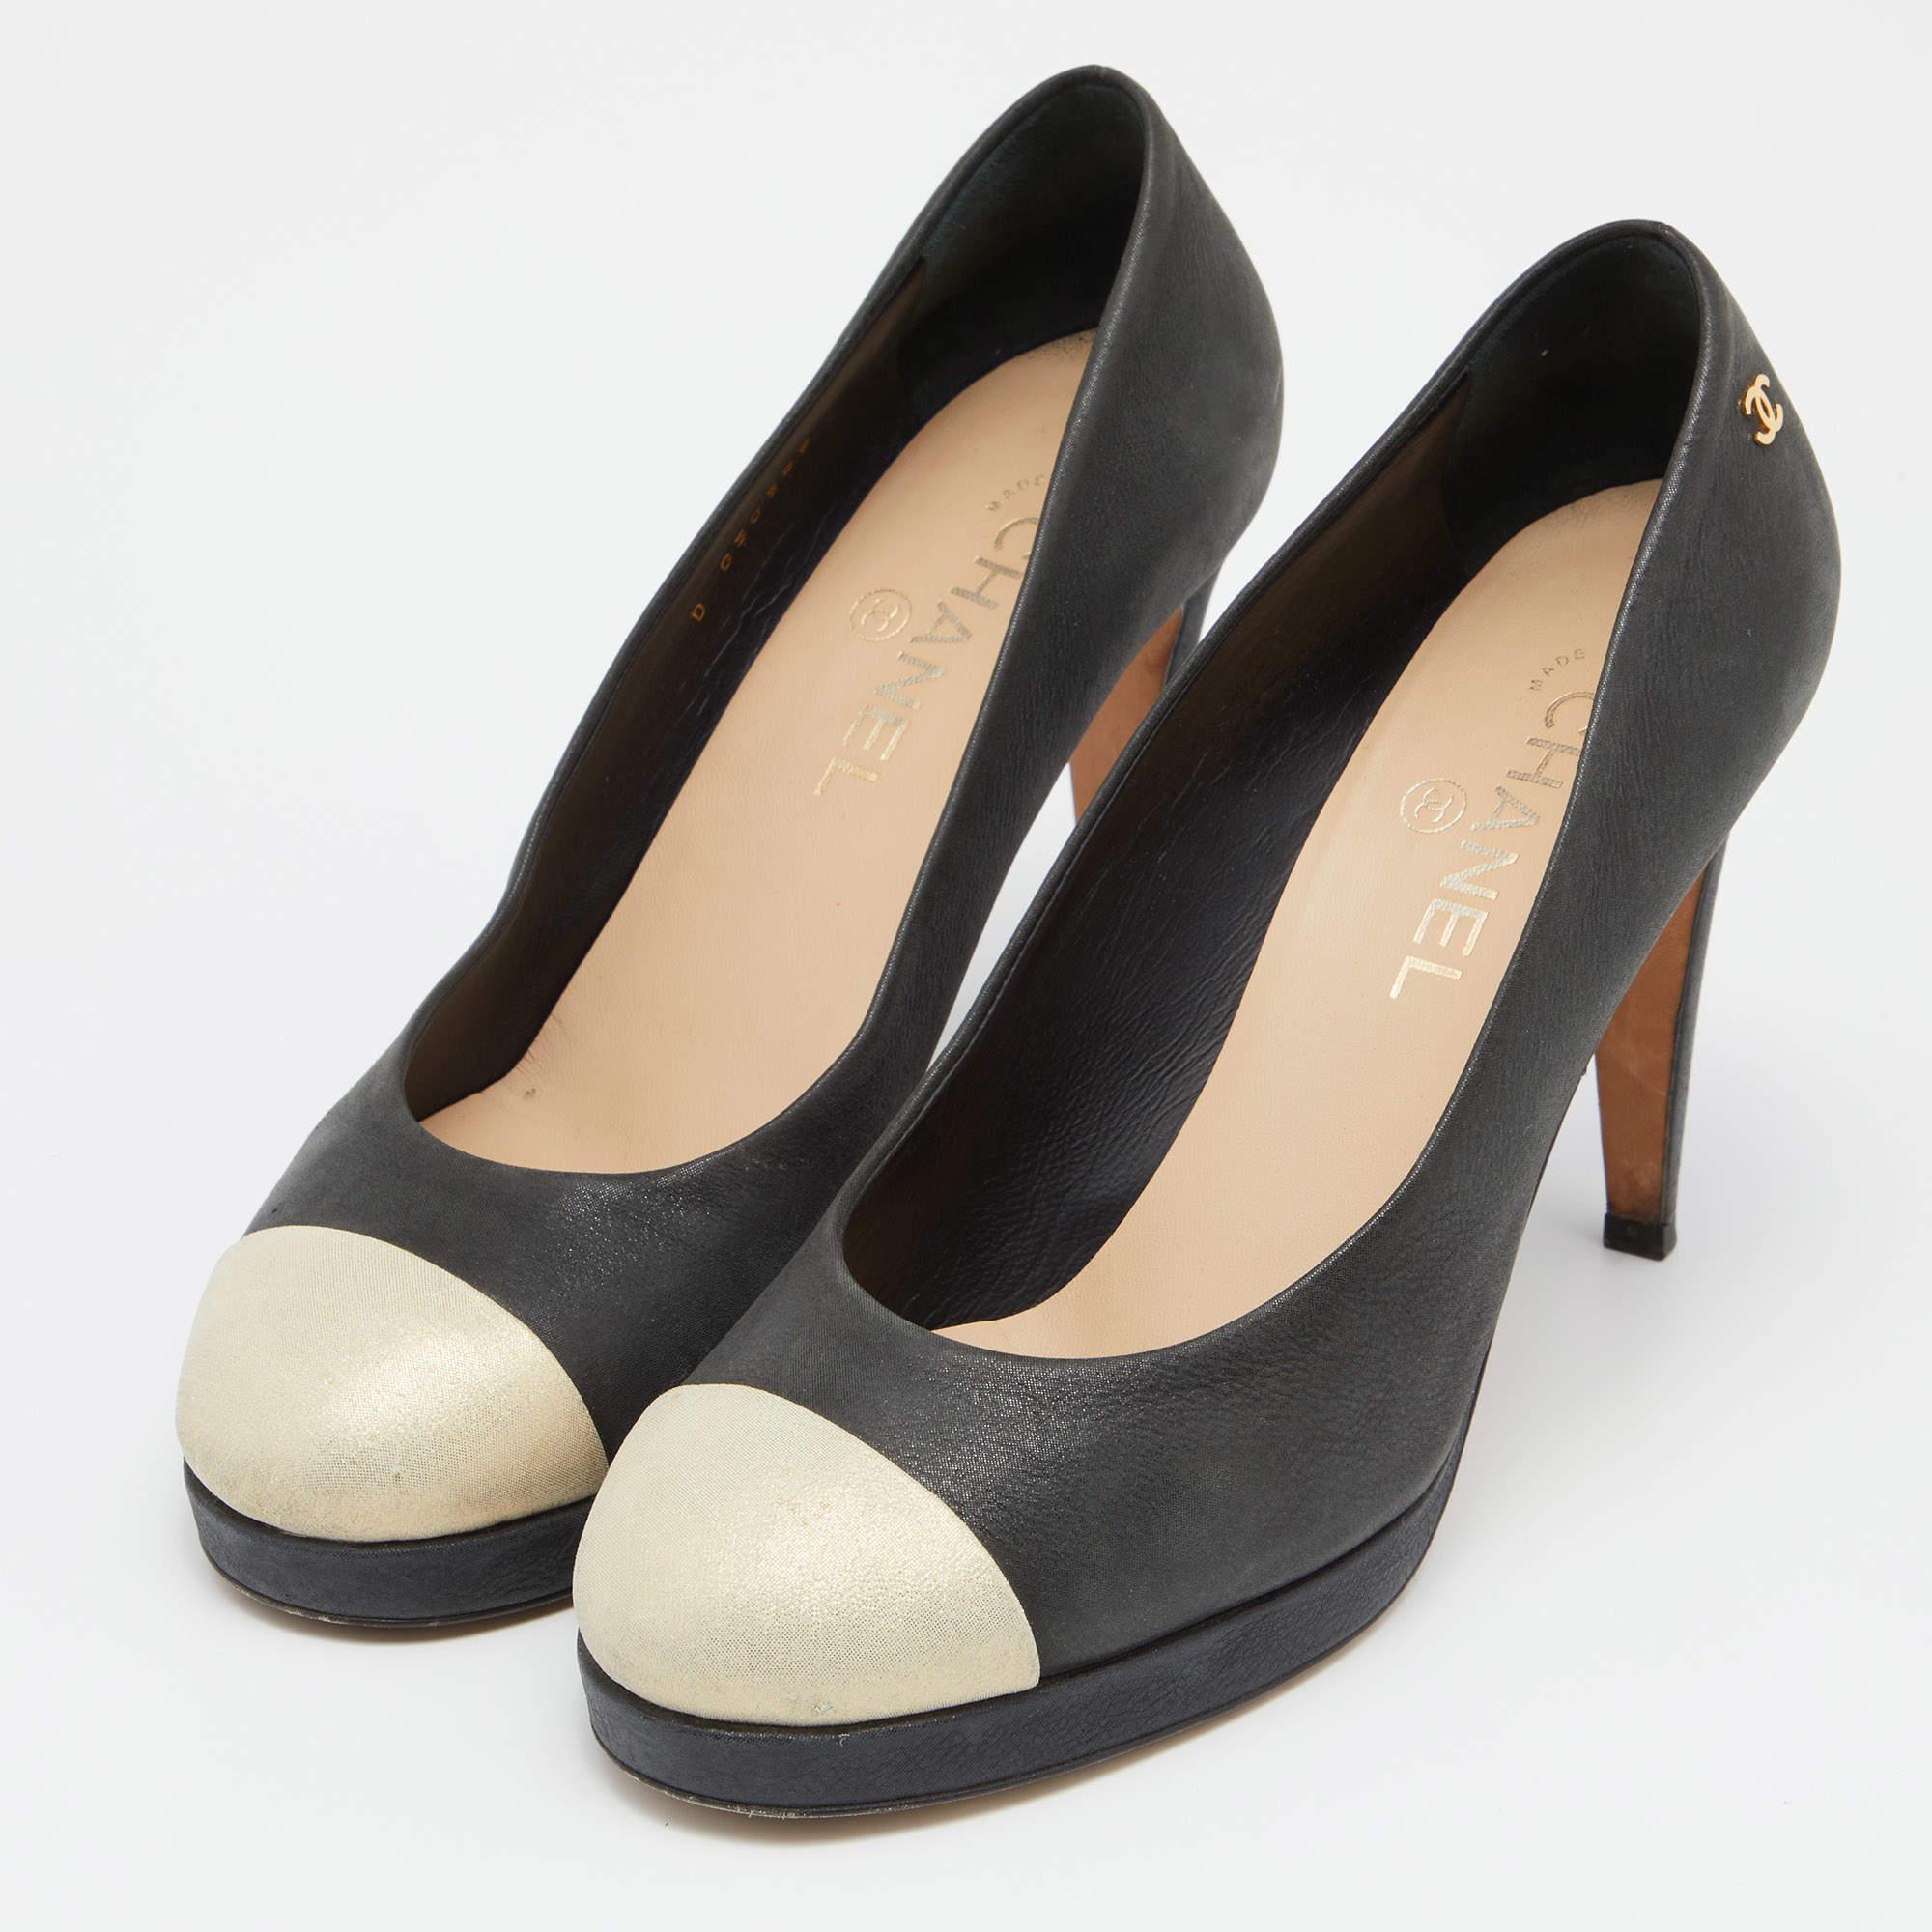 Make a chic style statement with these designer pumps. They showcase sturdy heels and durable soles, perfect for your fashionable outings!

Includes: Original Dustbag